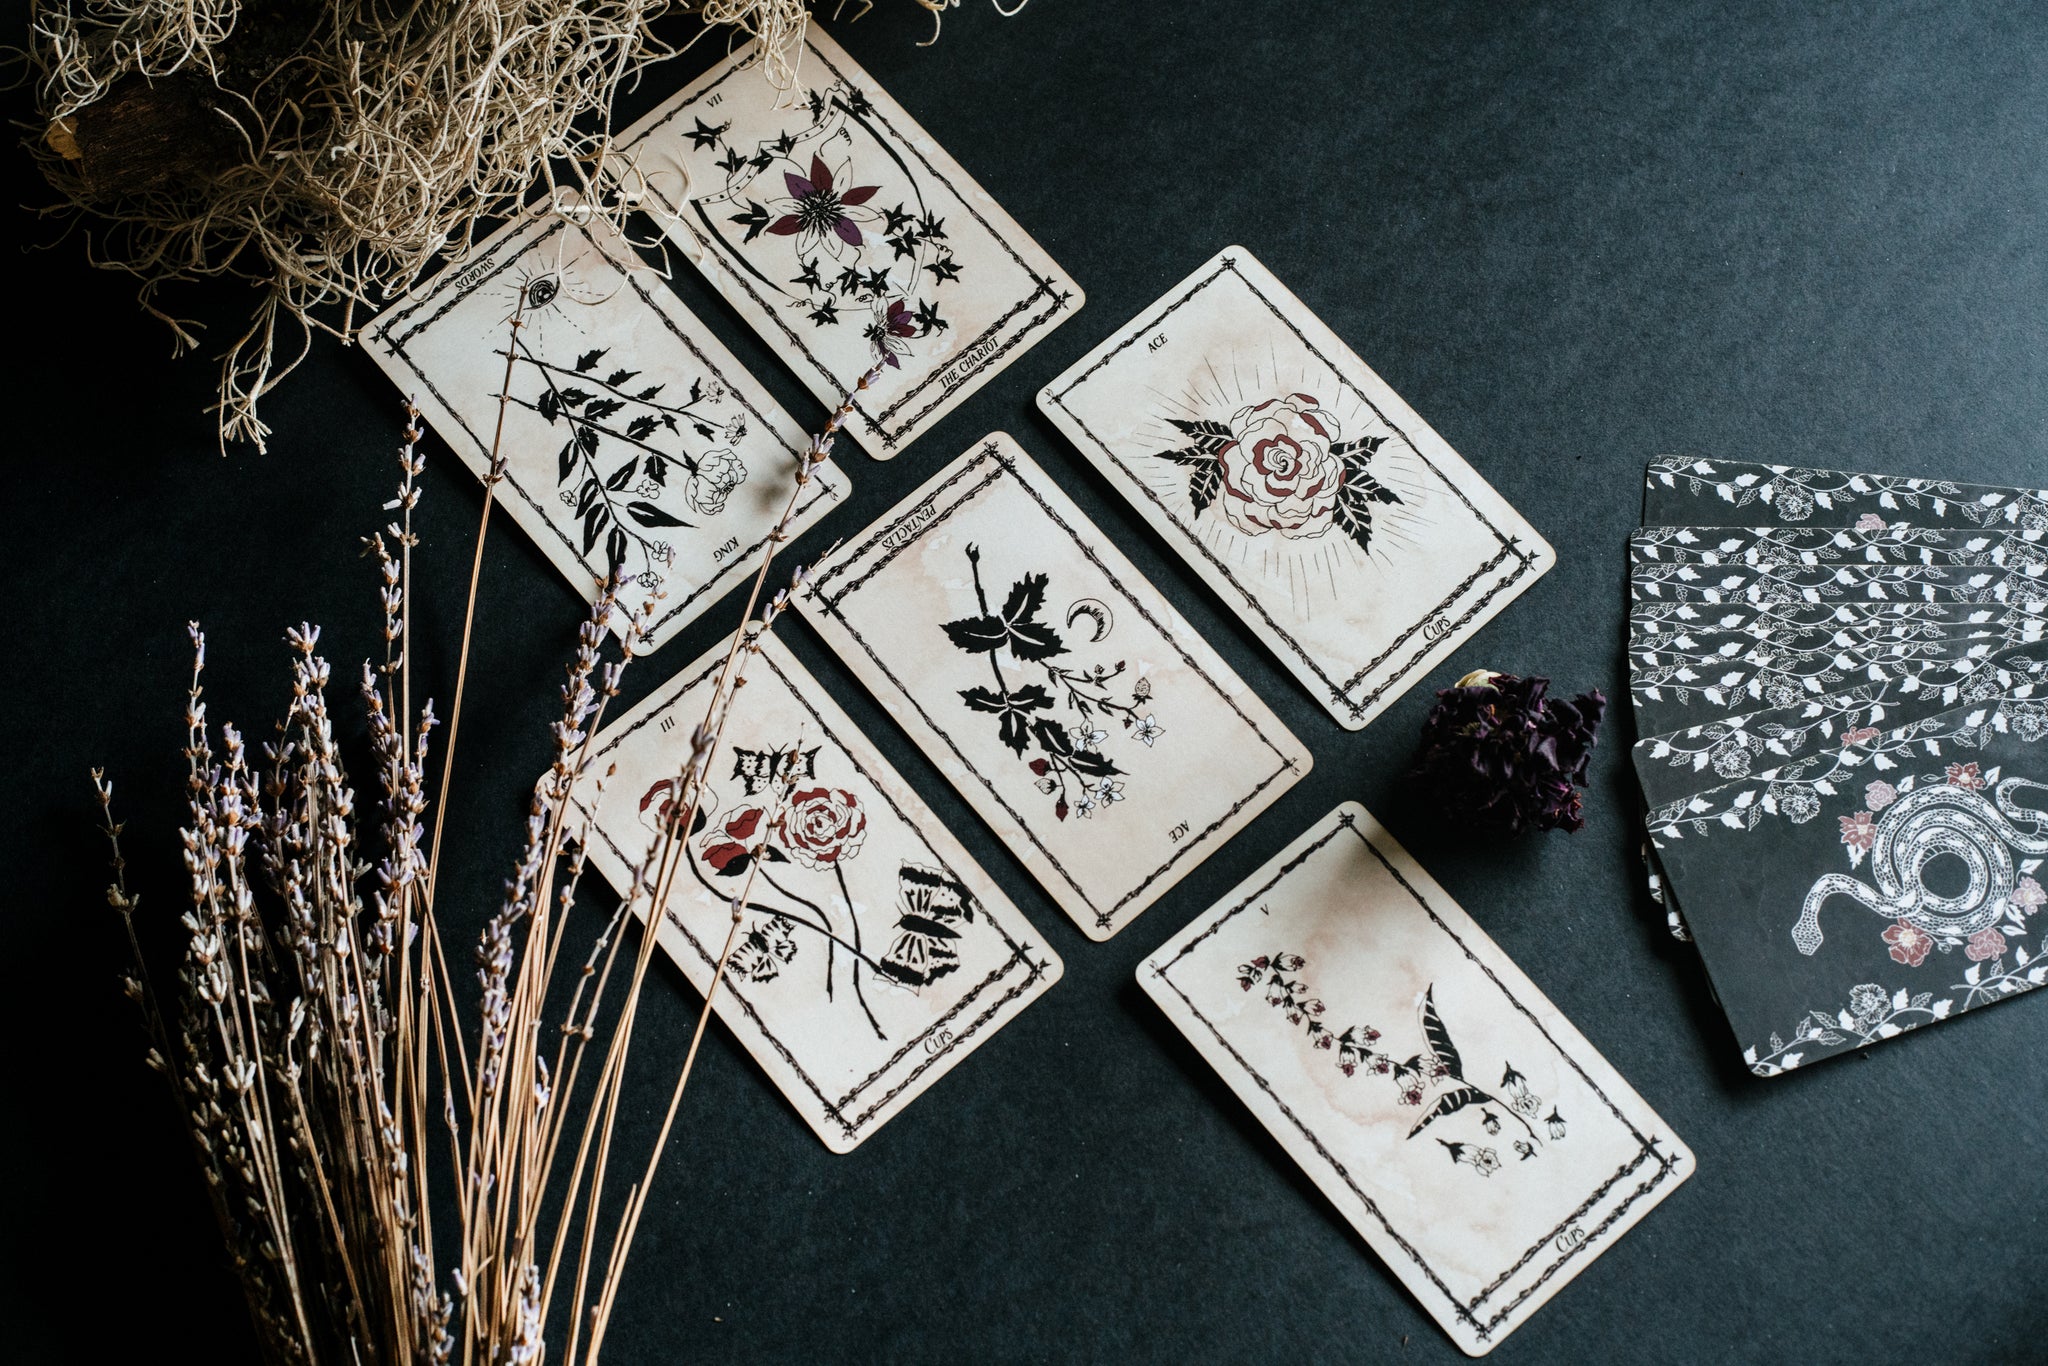 Shop Portland Local Altar PDX Northwest Handmade Independent Artists Tarot Cards Deck Ophidia Rosa Leila & Olive Spreads Magic Paganism Arcana Gothic Boho Chic Witch Fortune Telling Predictions Minimalist Floral Spiritual Blog